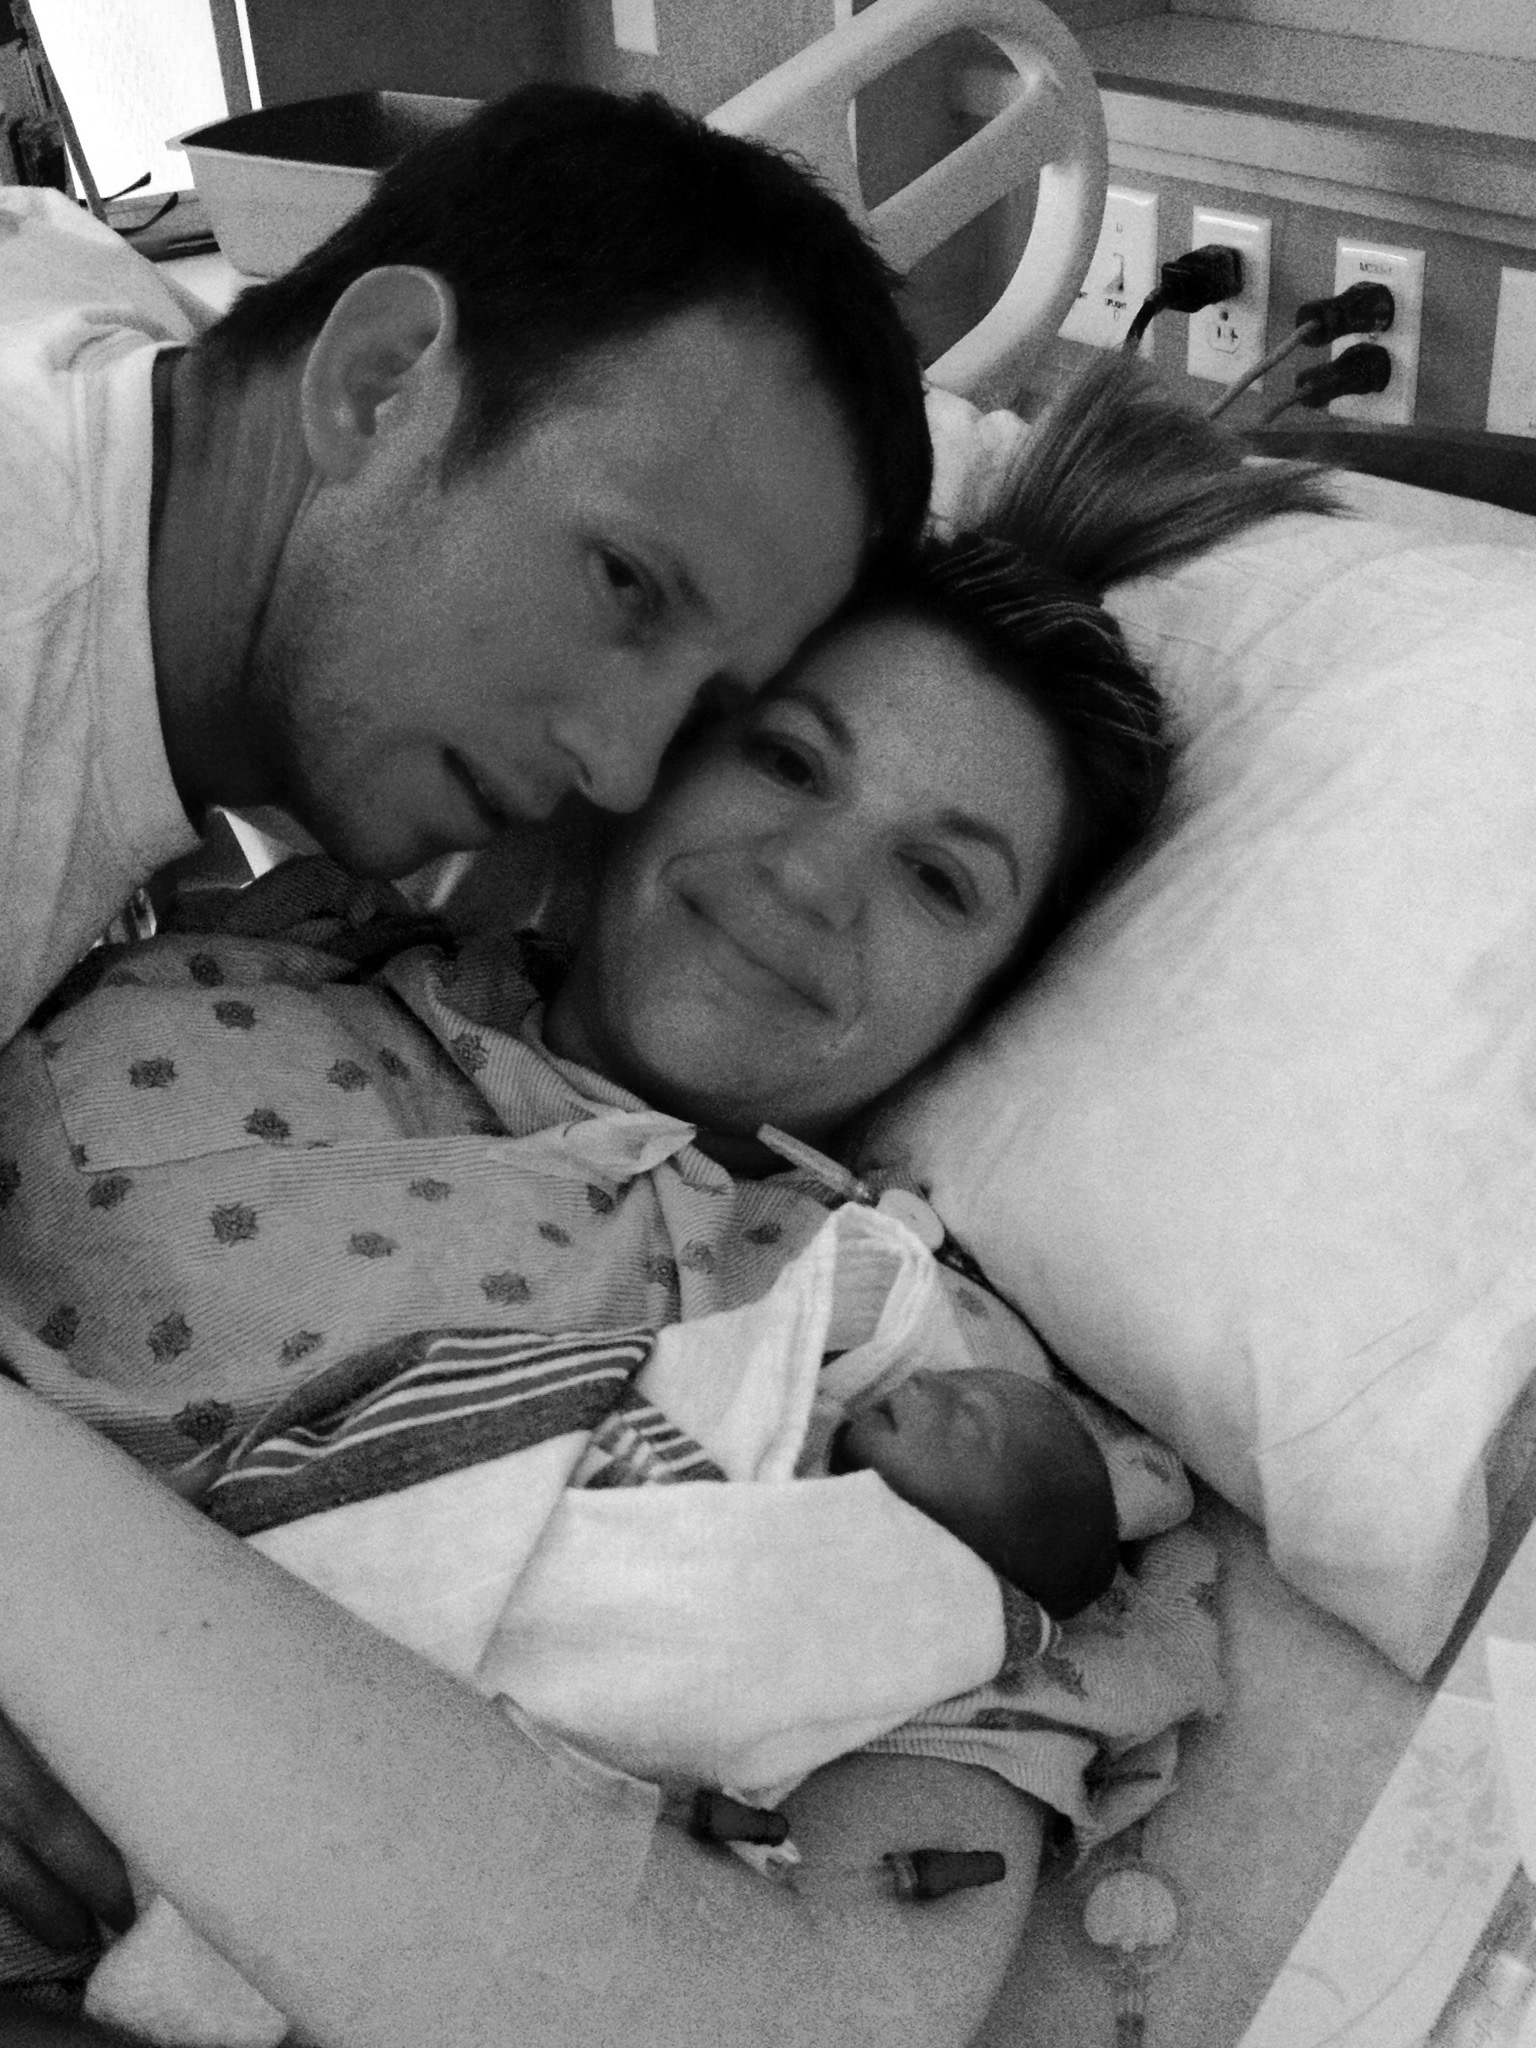 Stacey in a hospital bed with her husband and baby